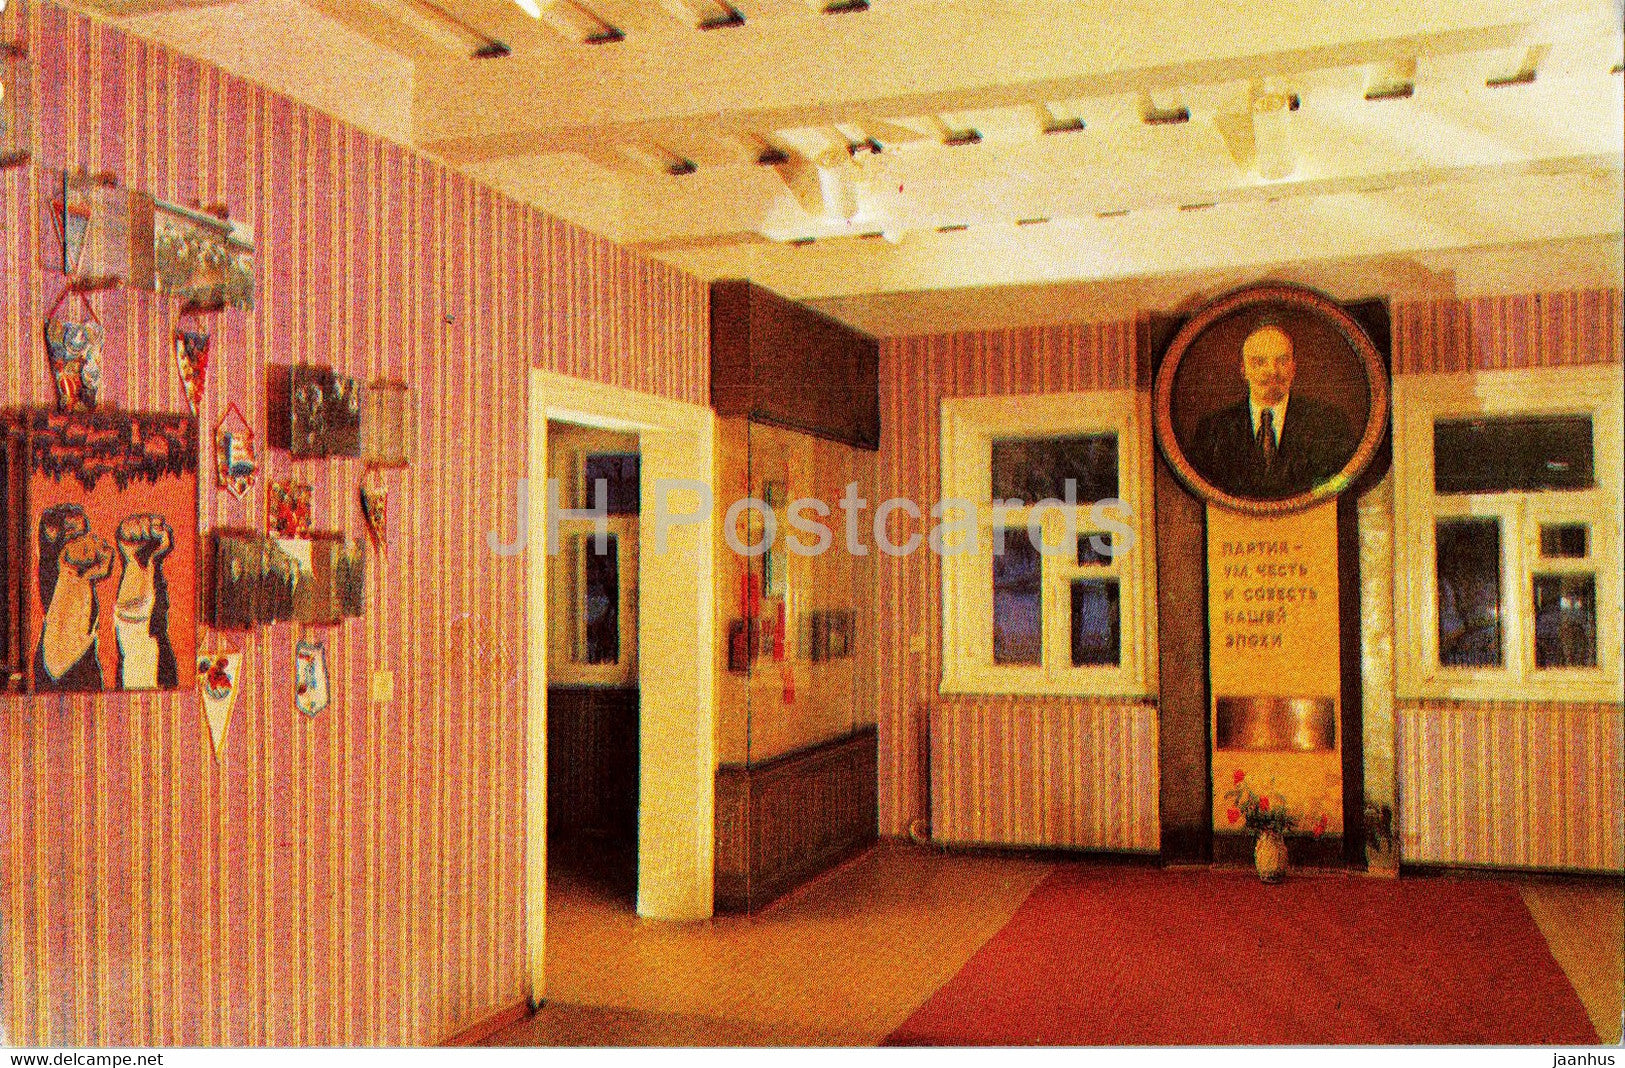 Minsk - In a hall of the House Museum - House Museum of the 1st Congress of the RSDLP - 1984 - Belarus USSR - unused - JH Postcards